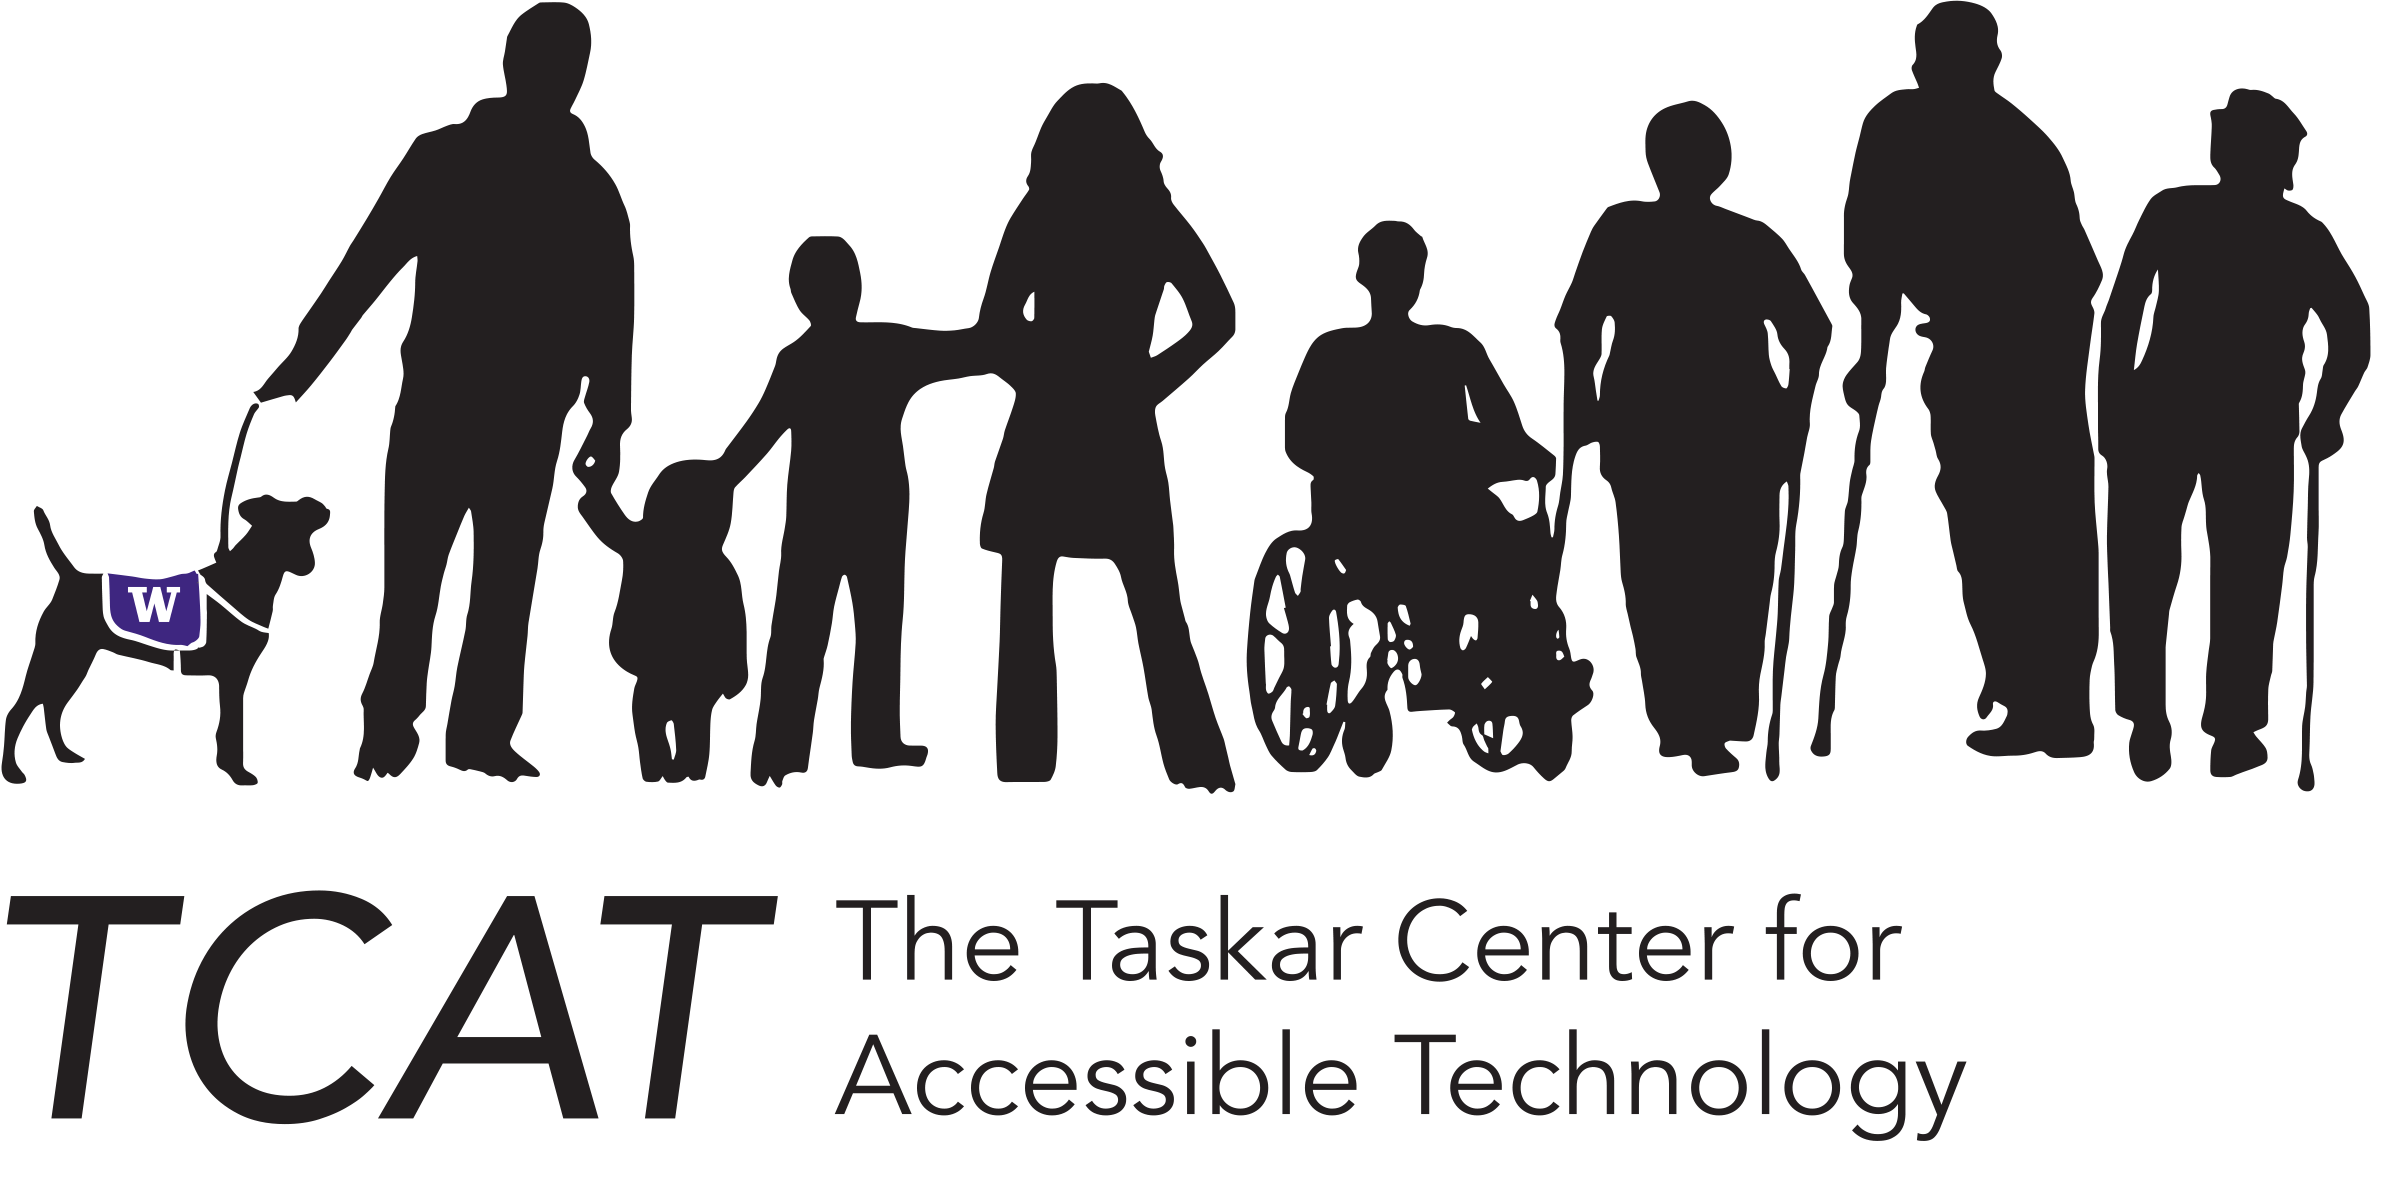 Logo for The Taskar Center for Accessible Technology shows silhouettes depicting people (and a dog) with various mobility aids. Below, the TCAT acronym and full text are in black text.